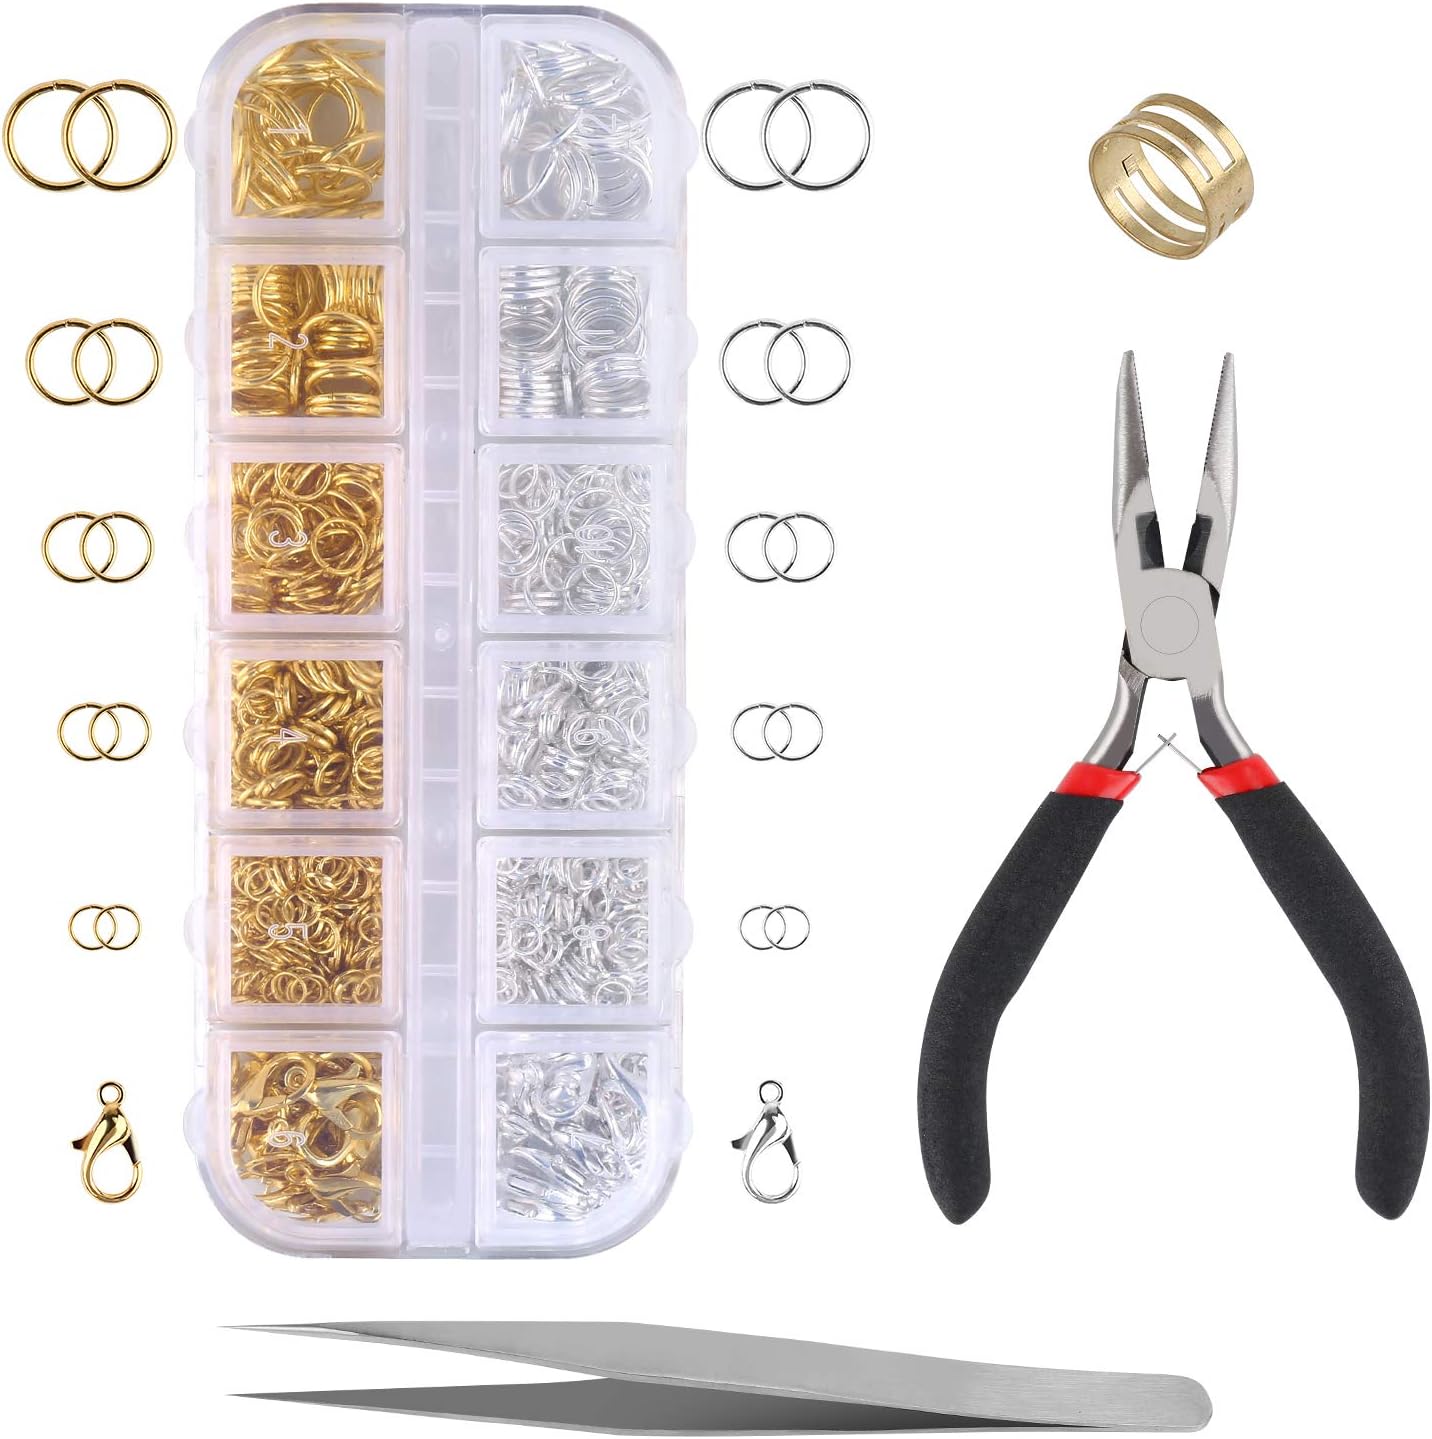 Jewelry Findings Kit, 1200 Pieces